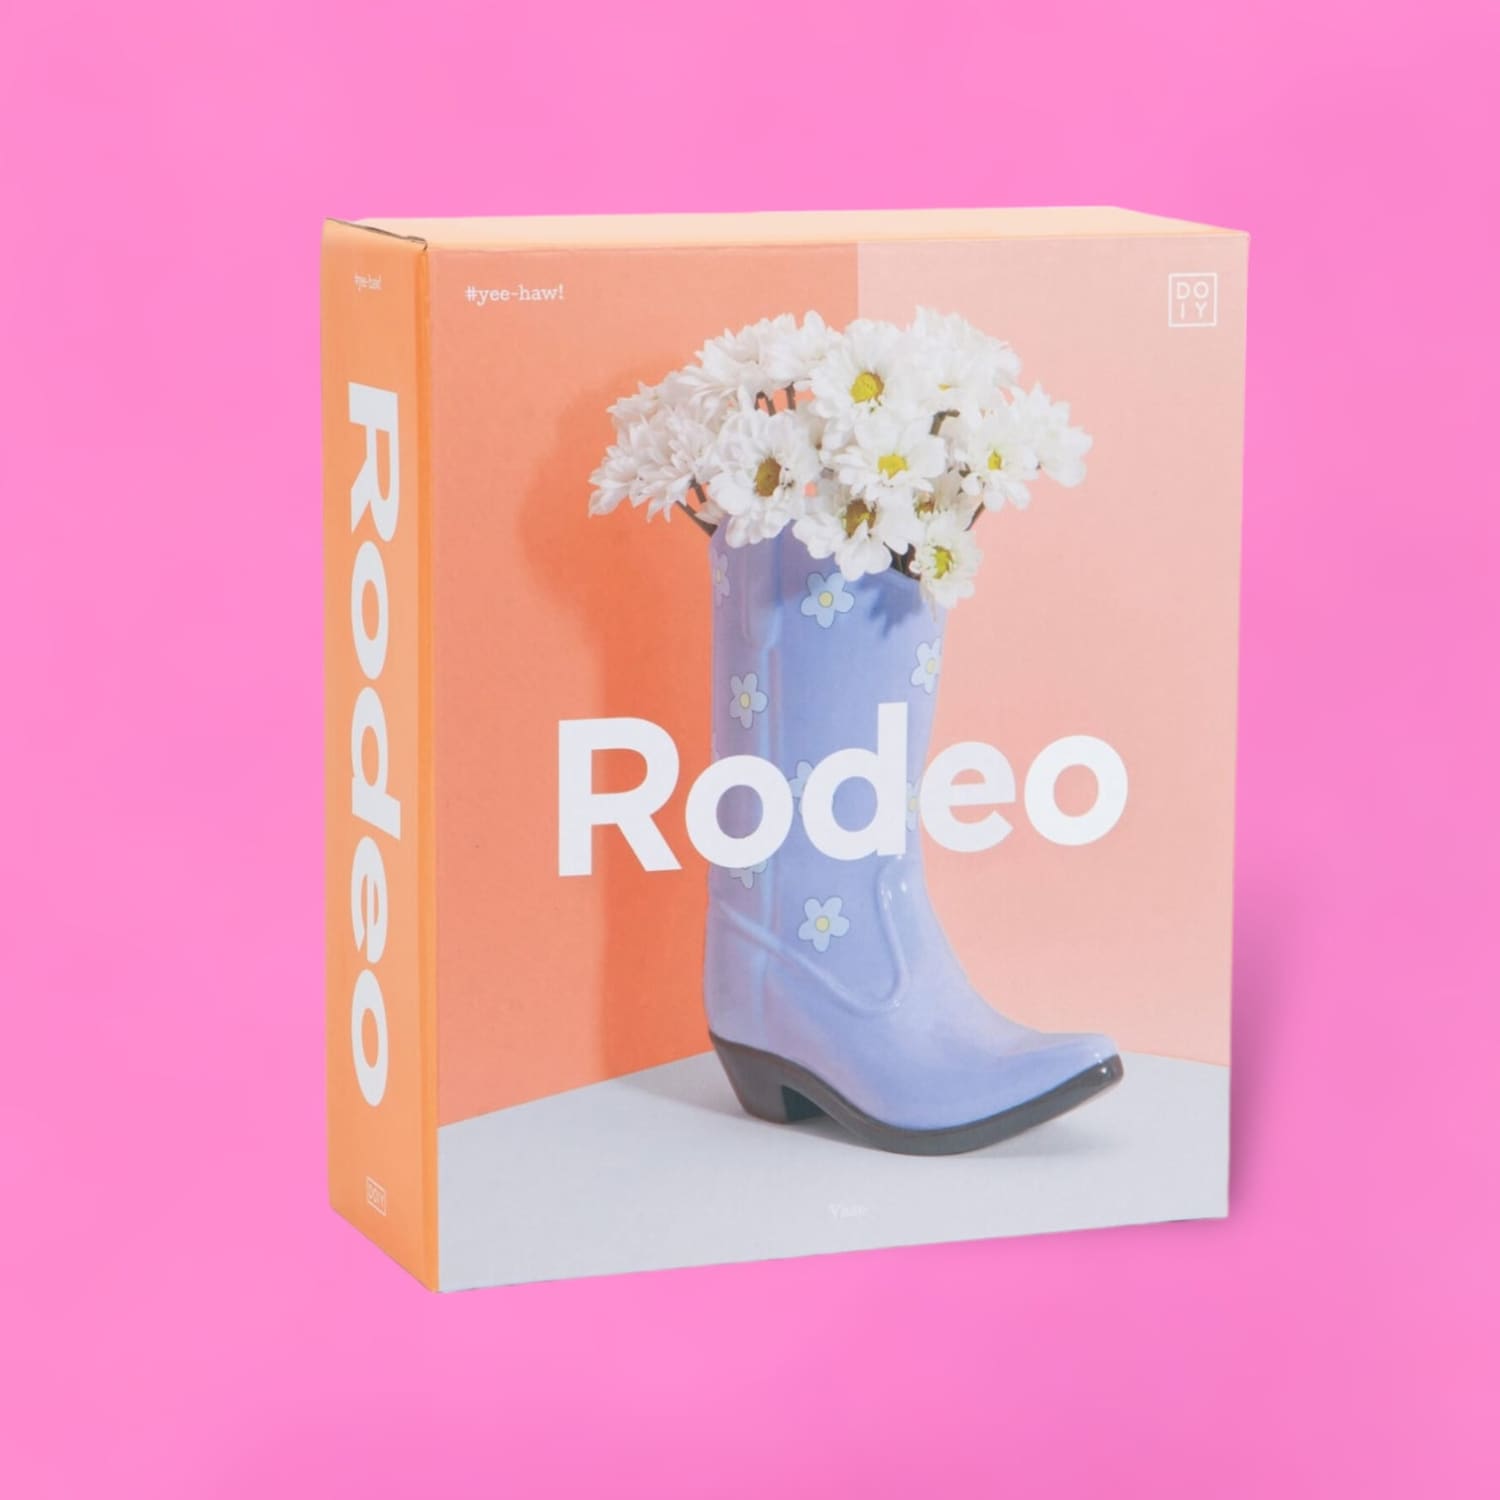 Cowboy Boot Rodeo Vase - Lilac Decor Floral Home Accent